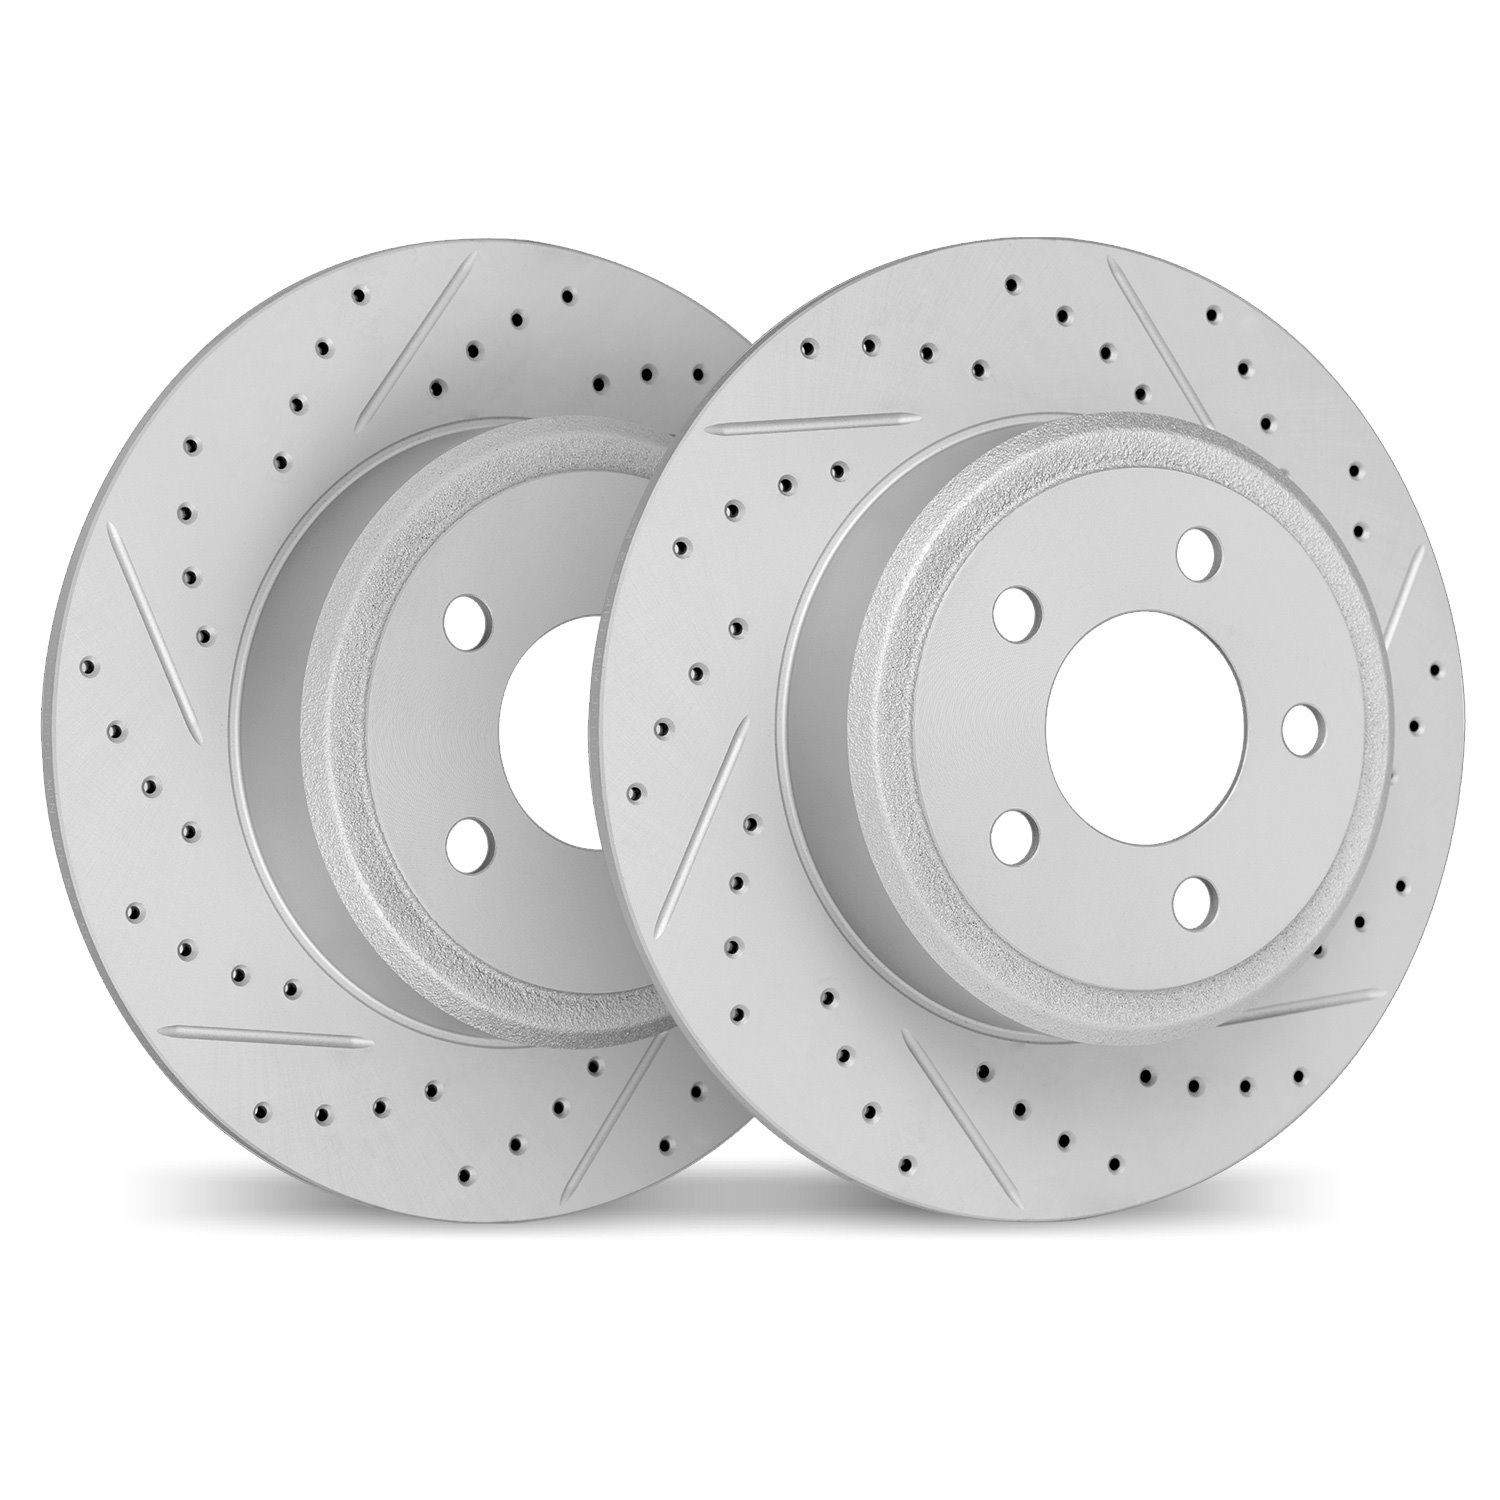 2002-45019 Geoperformance Drilled/Slotted Brake Rotors, 1998-2005 GM, Position: Rear